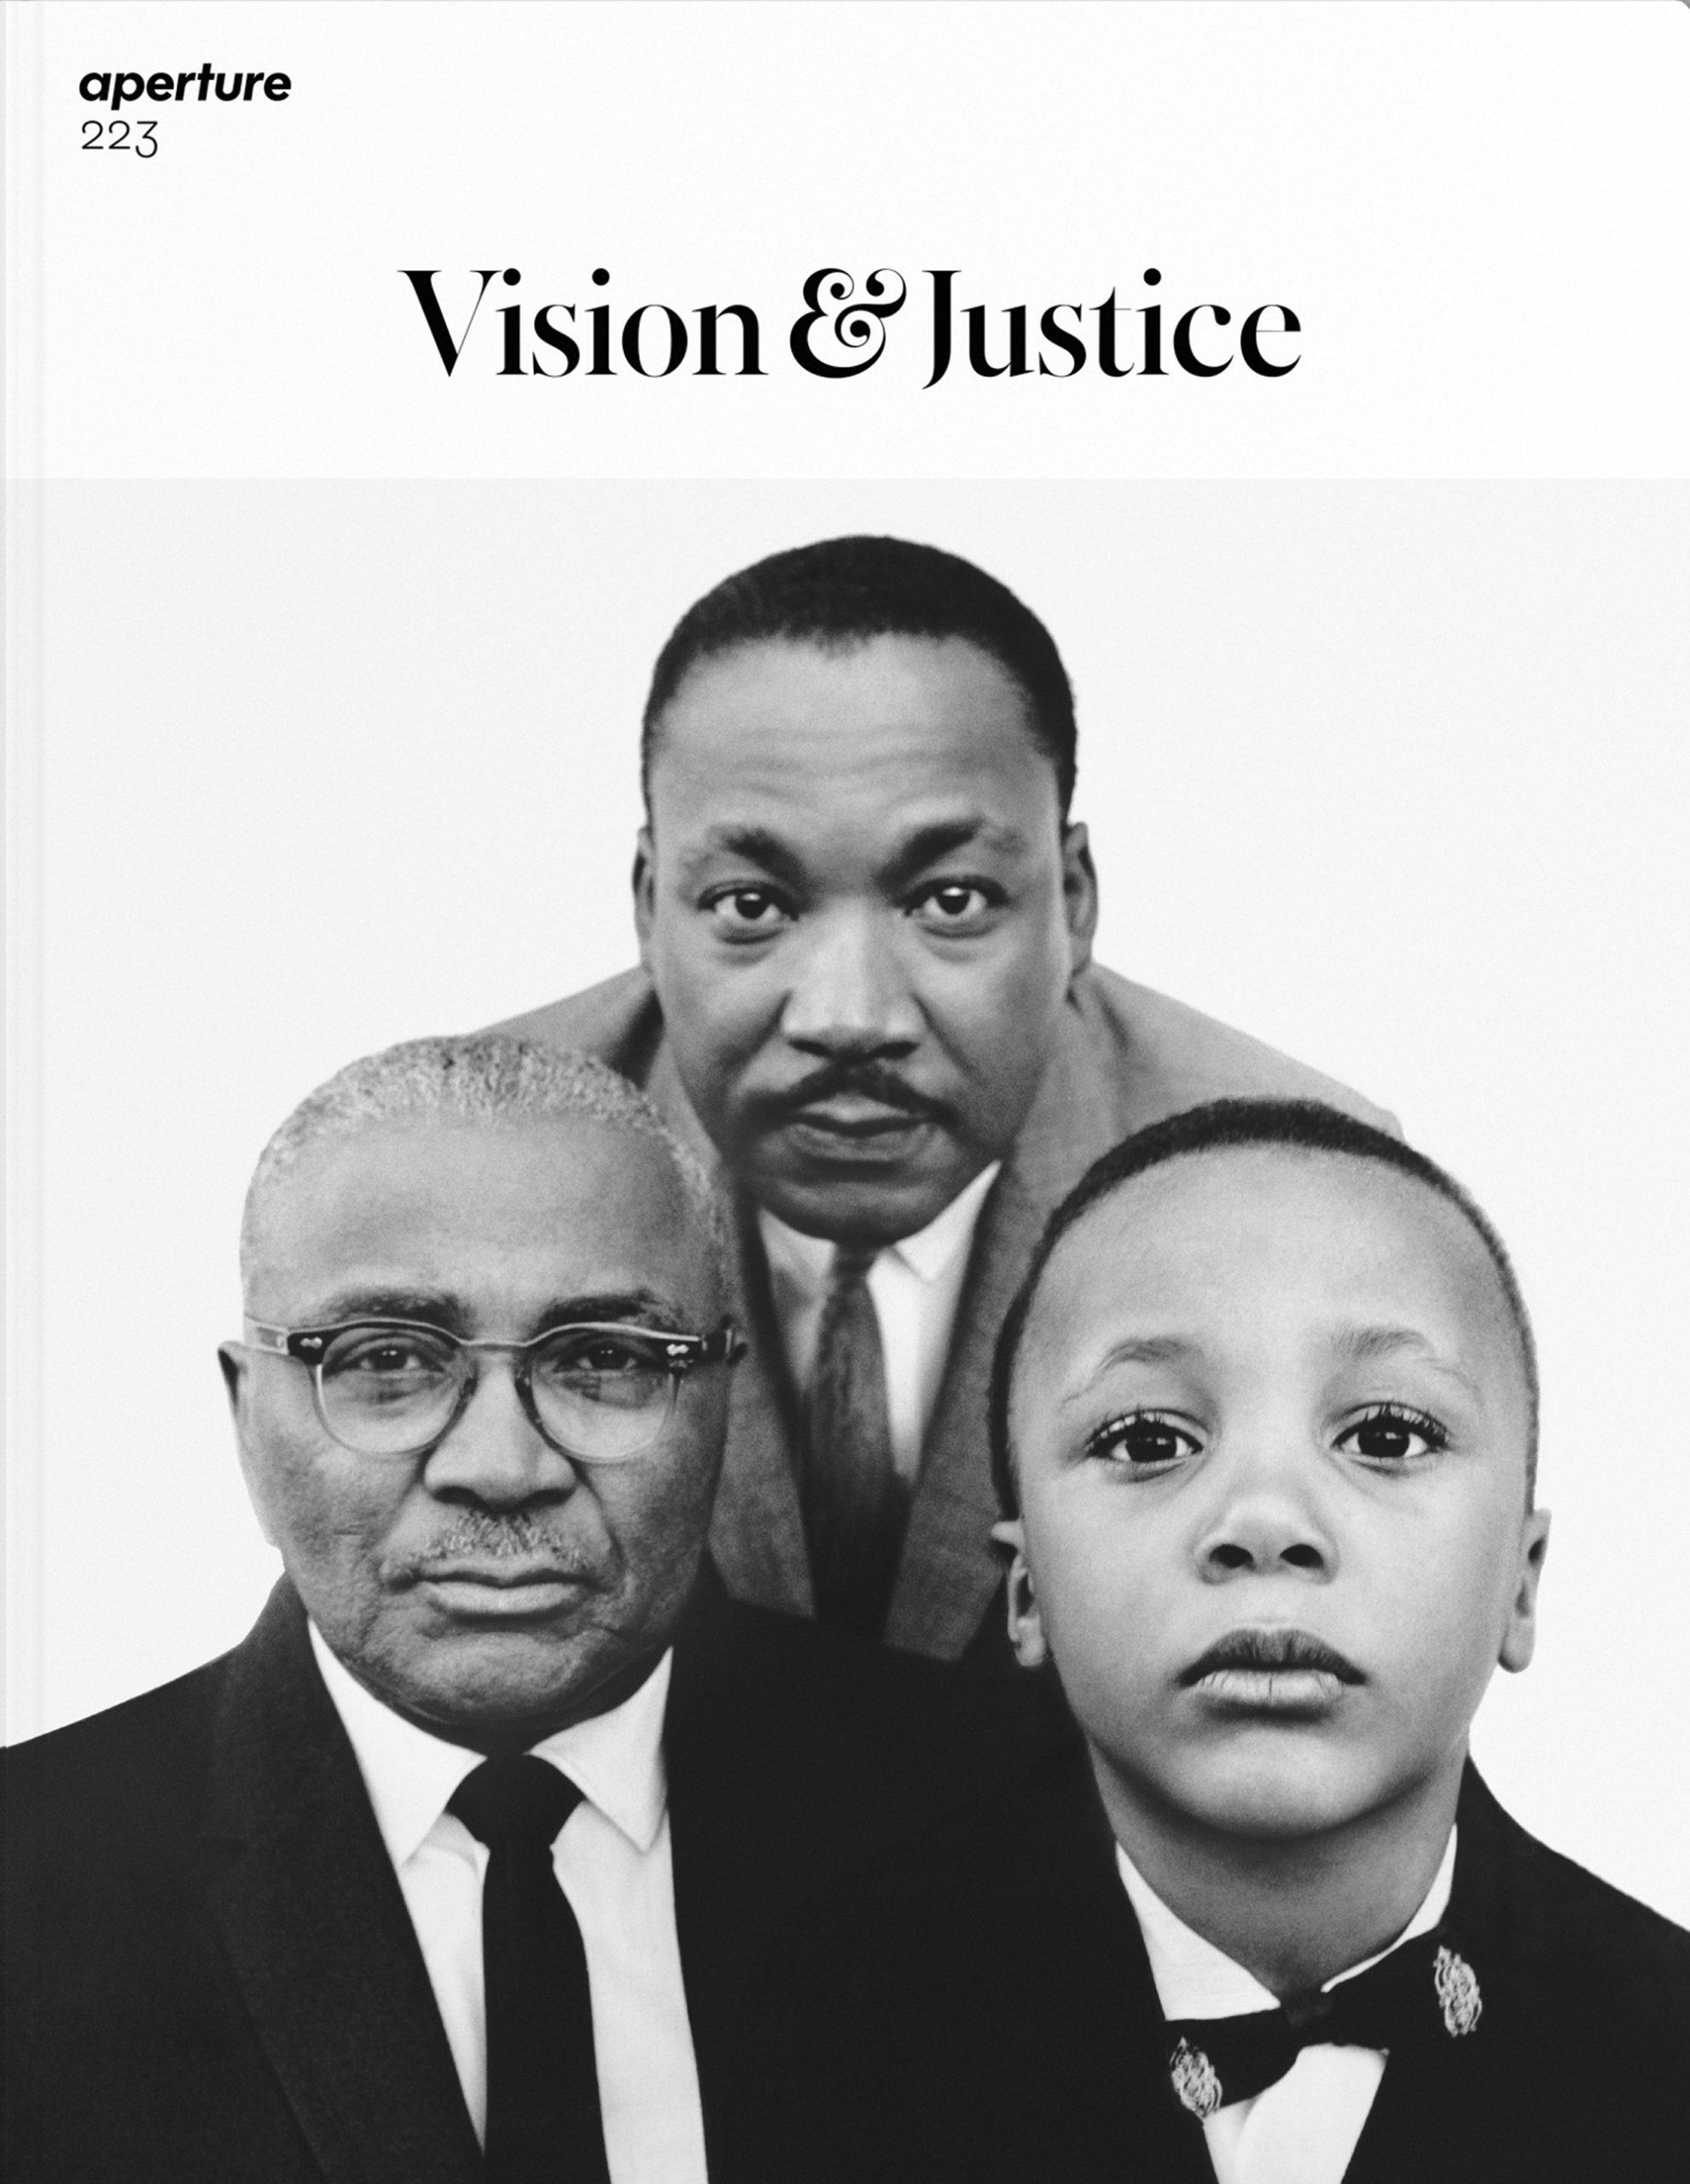 The two covers of <em>Aperture</em>, issue 223, “Vision & Justice,” Summer 2016. Photographs by Richard Avedon (left) and Awol Erizku (right)”>
		</div>
		<div class=